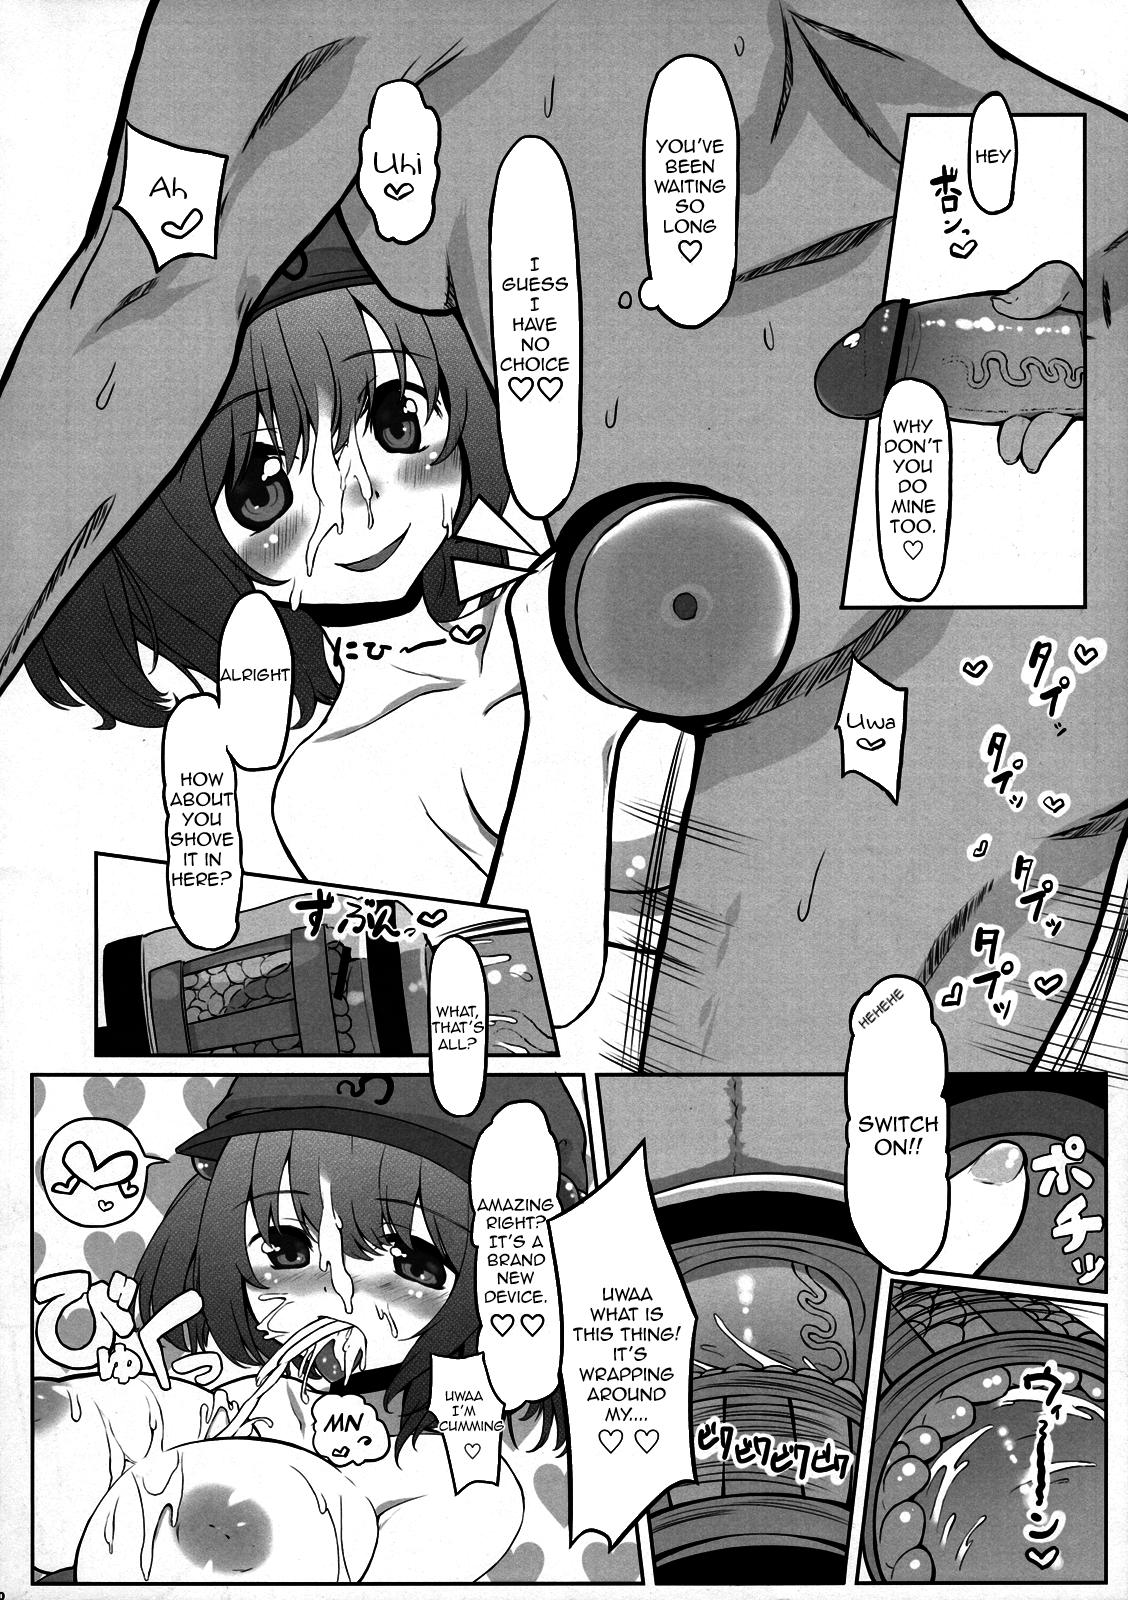 Cumming KKMK vol.3 - Touhou project Gostoso - Page 12